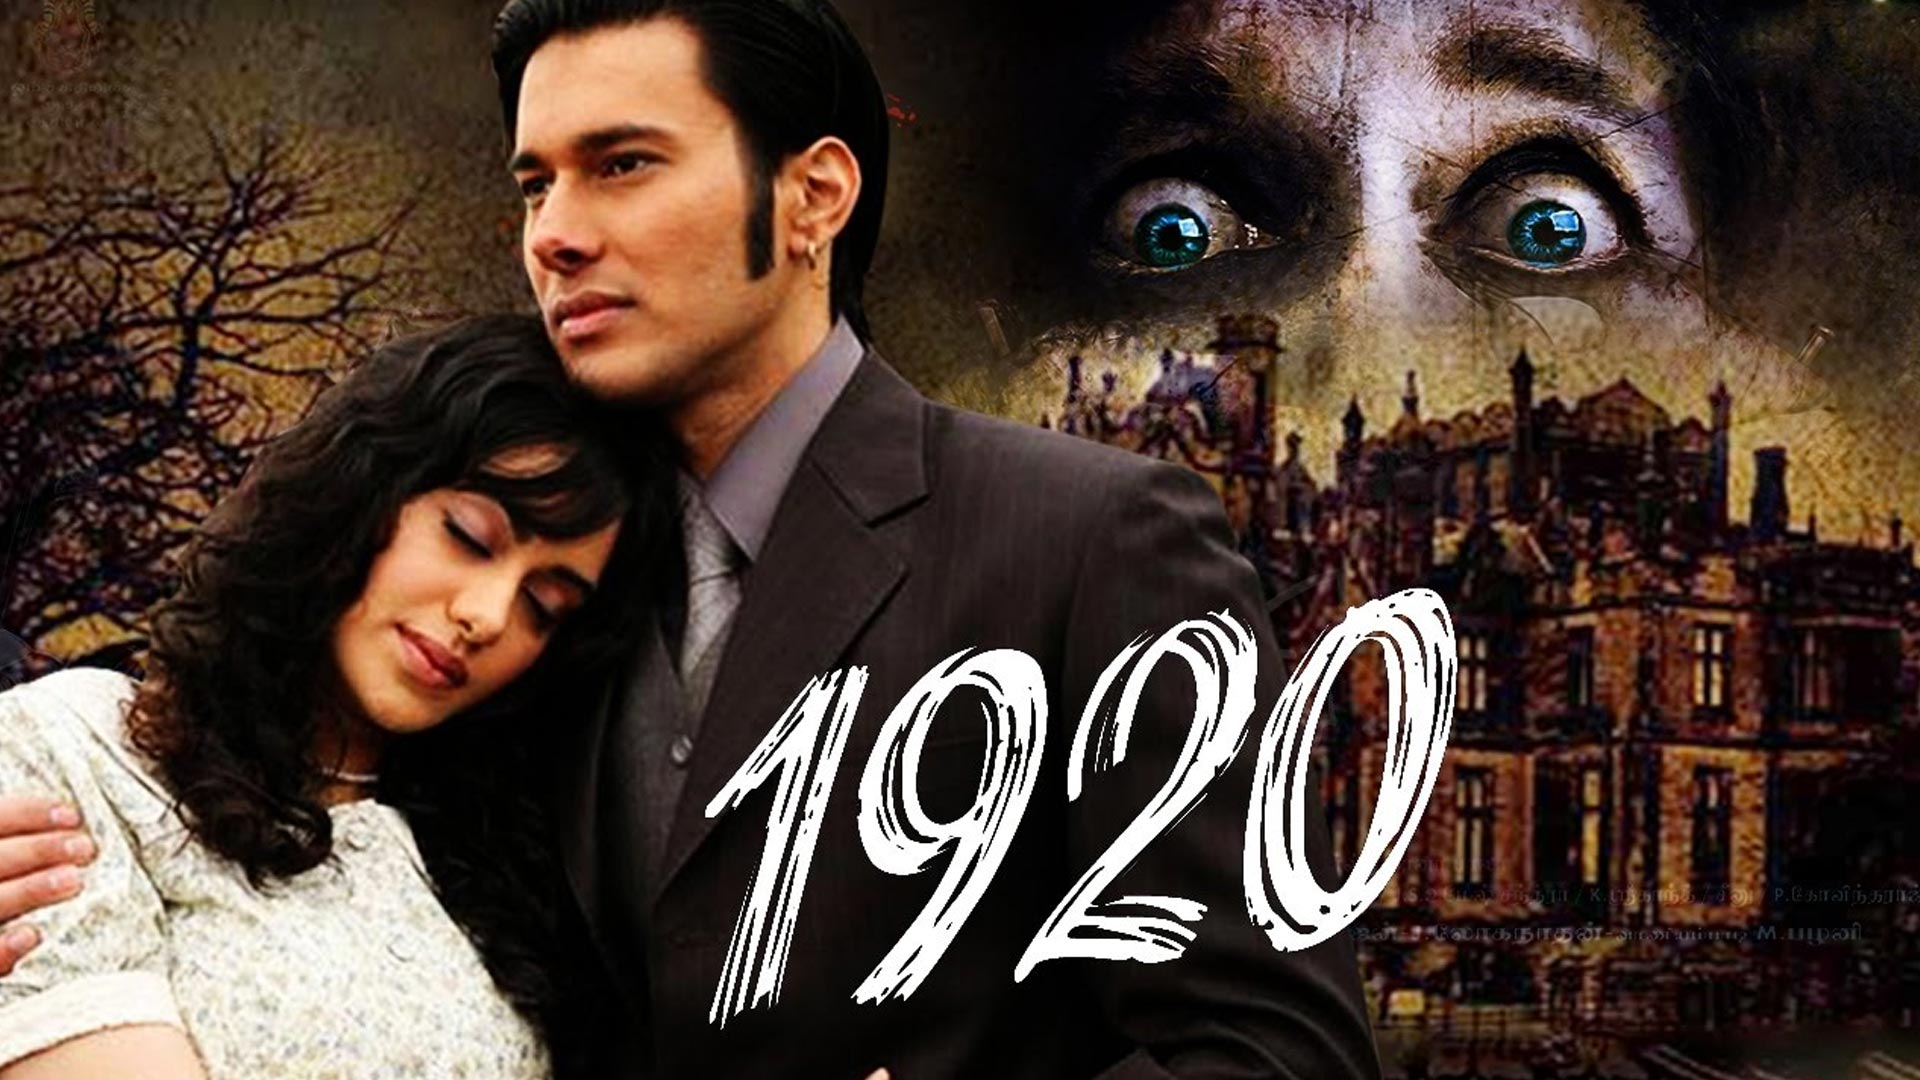 1920 Full Movie Online Watch 1920 in Full HD Quality